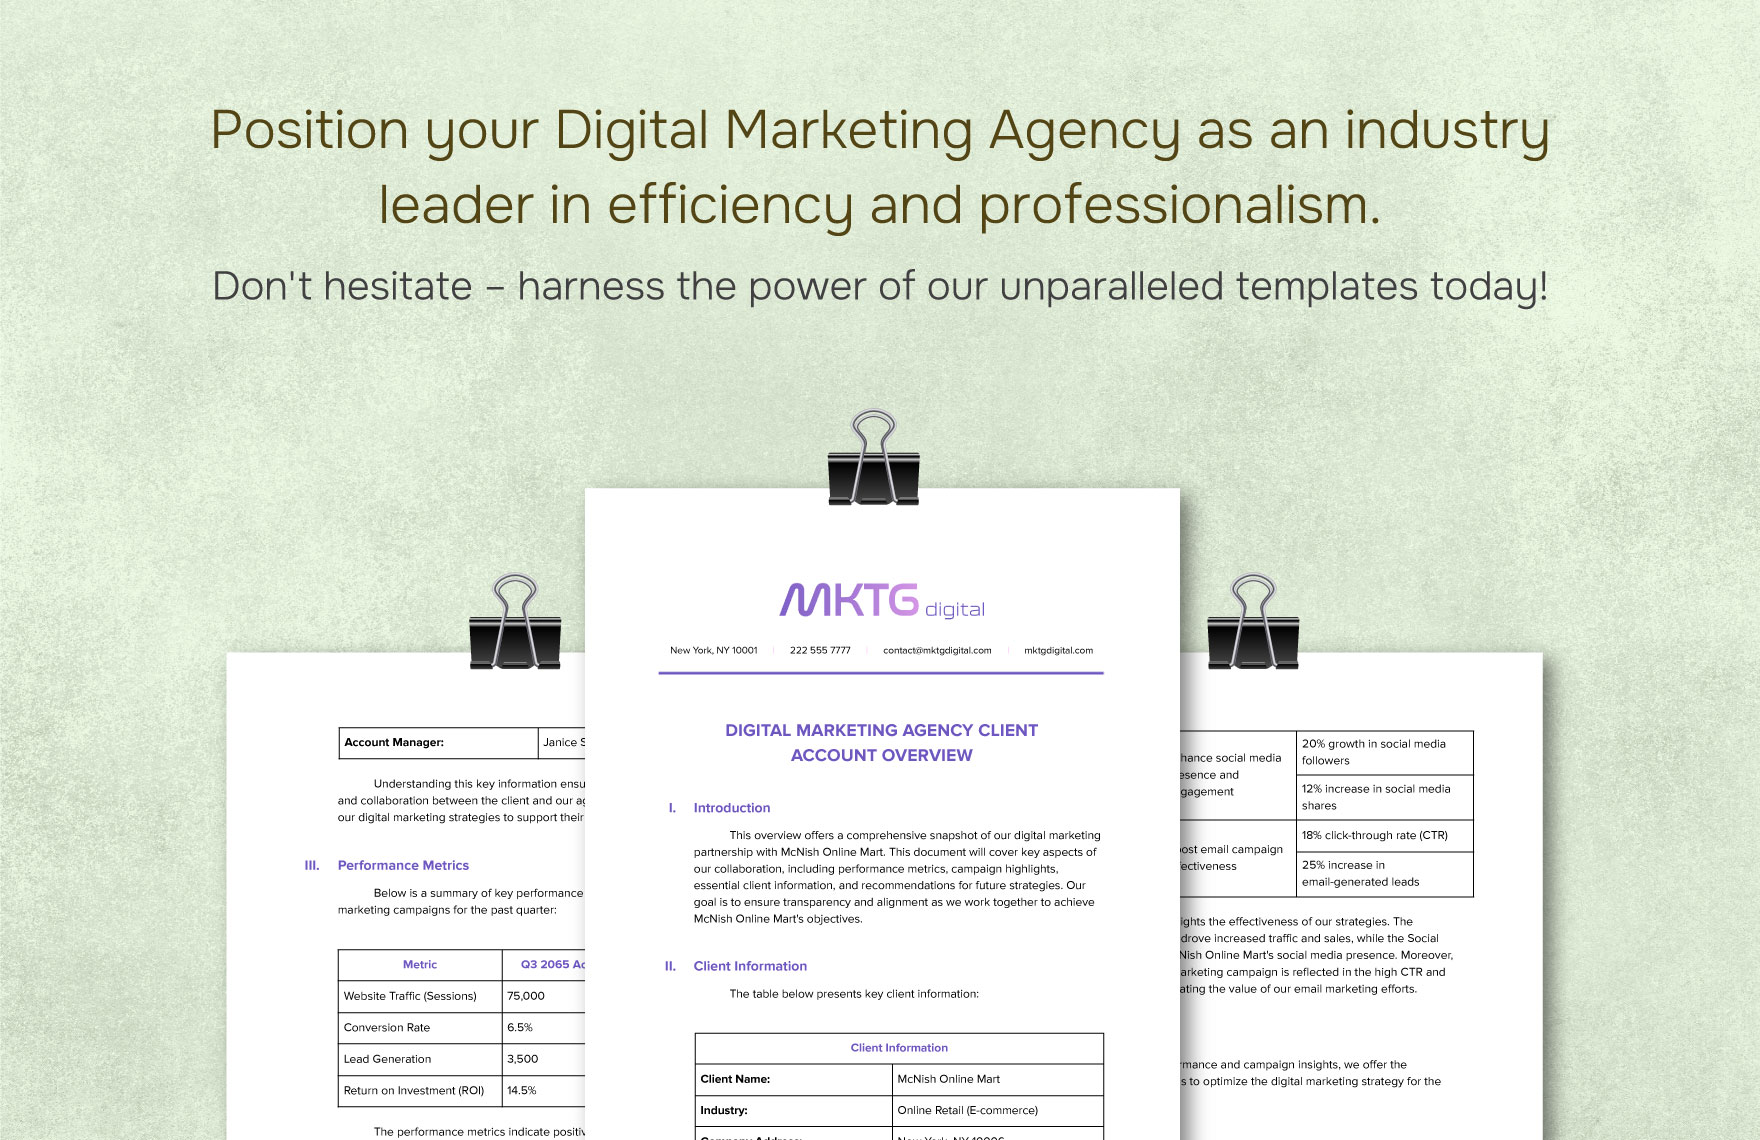 Digital Marketing Agency Client Account Overview Template